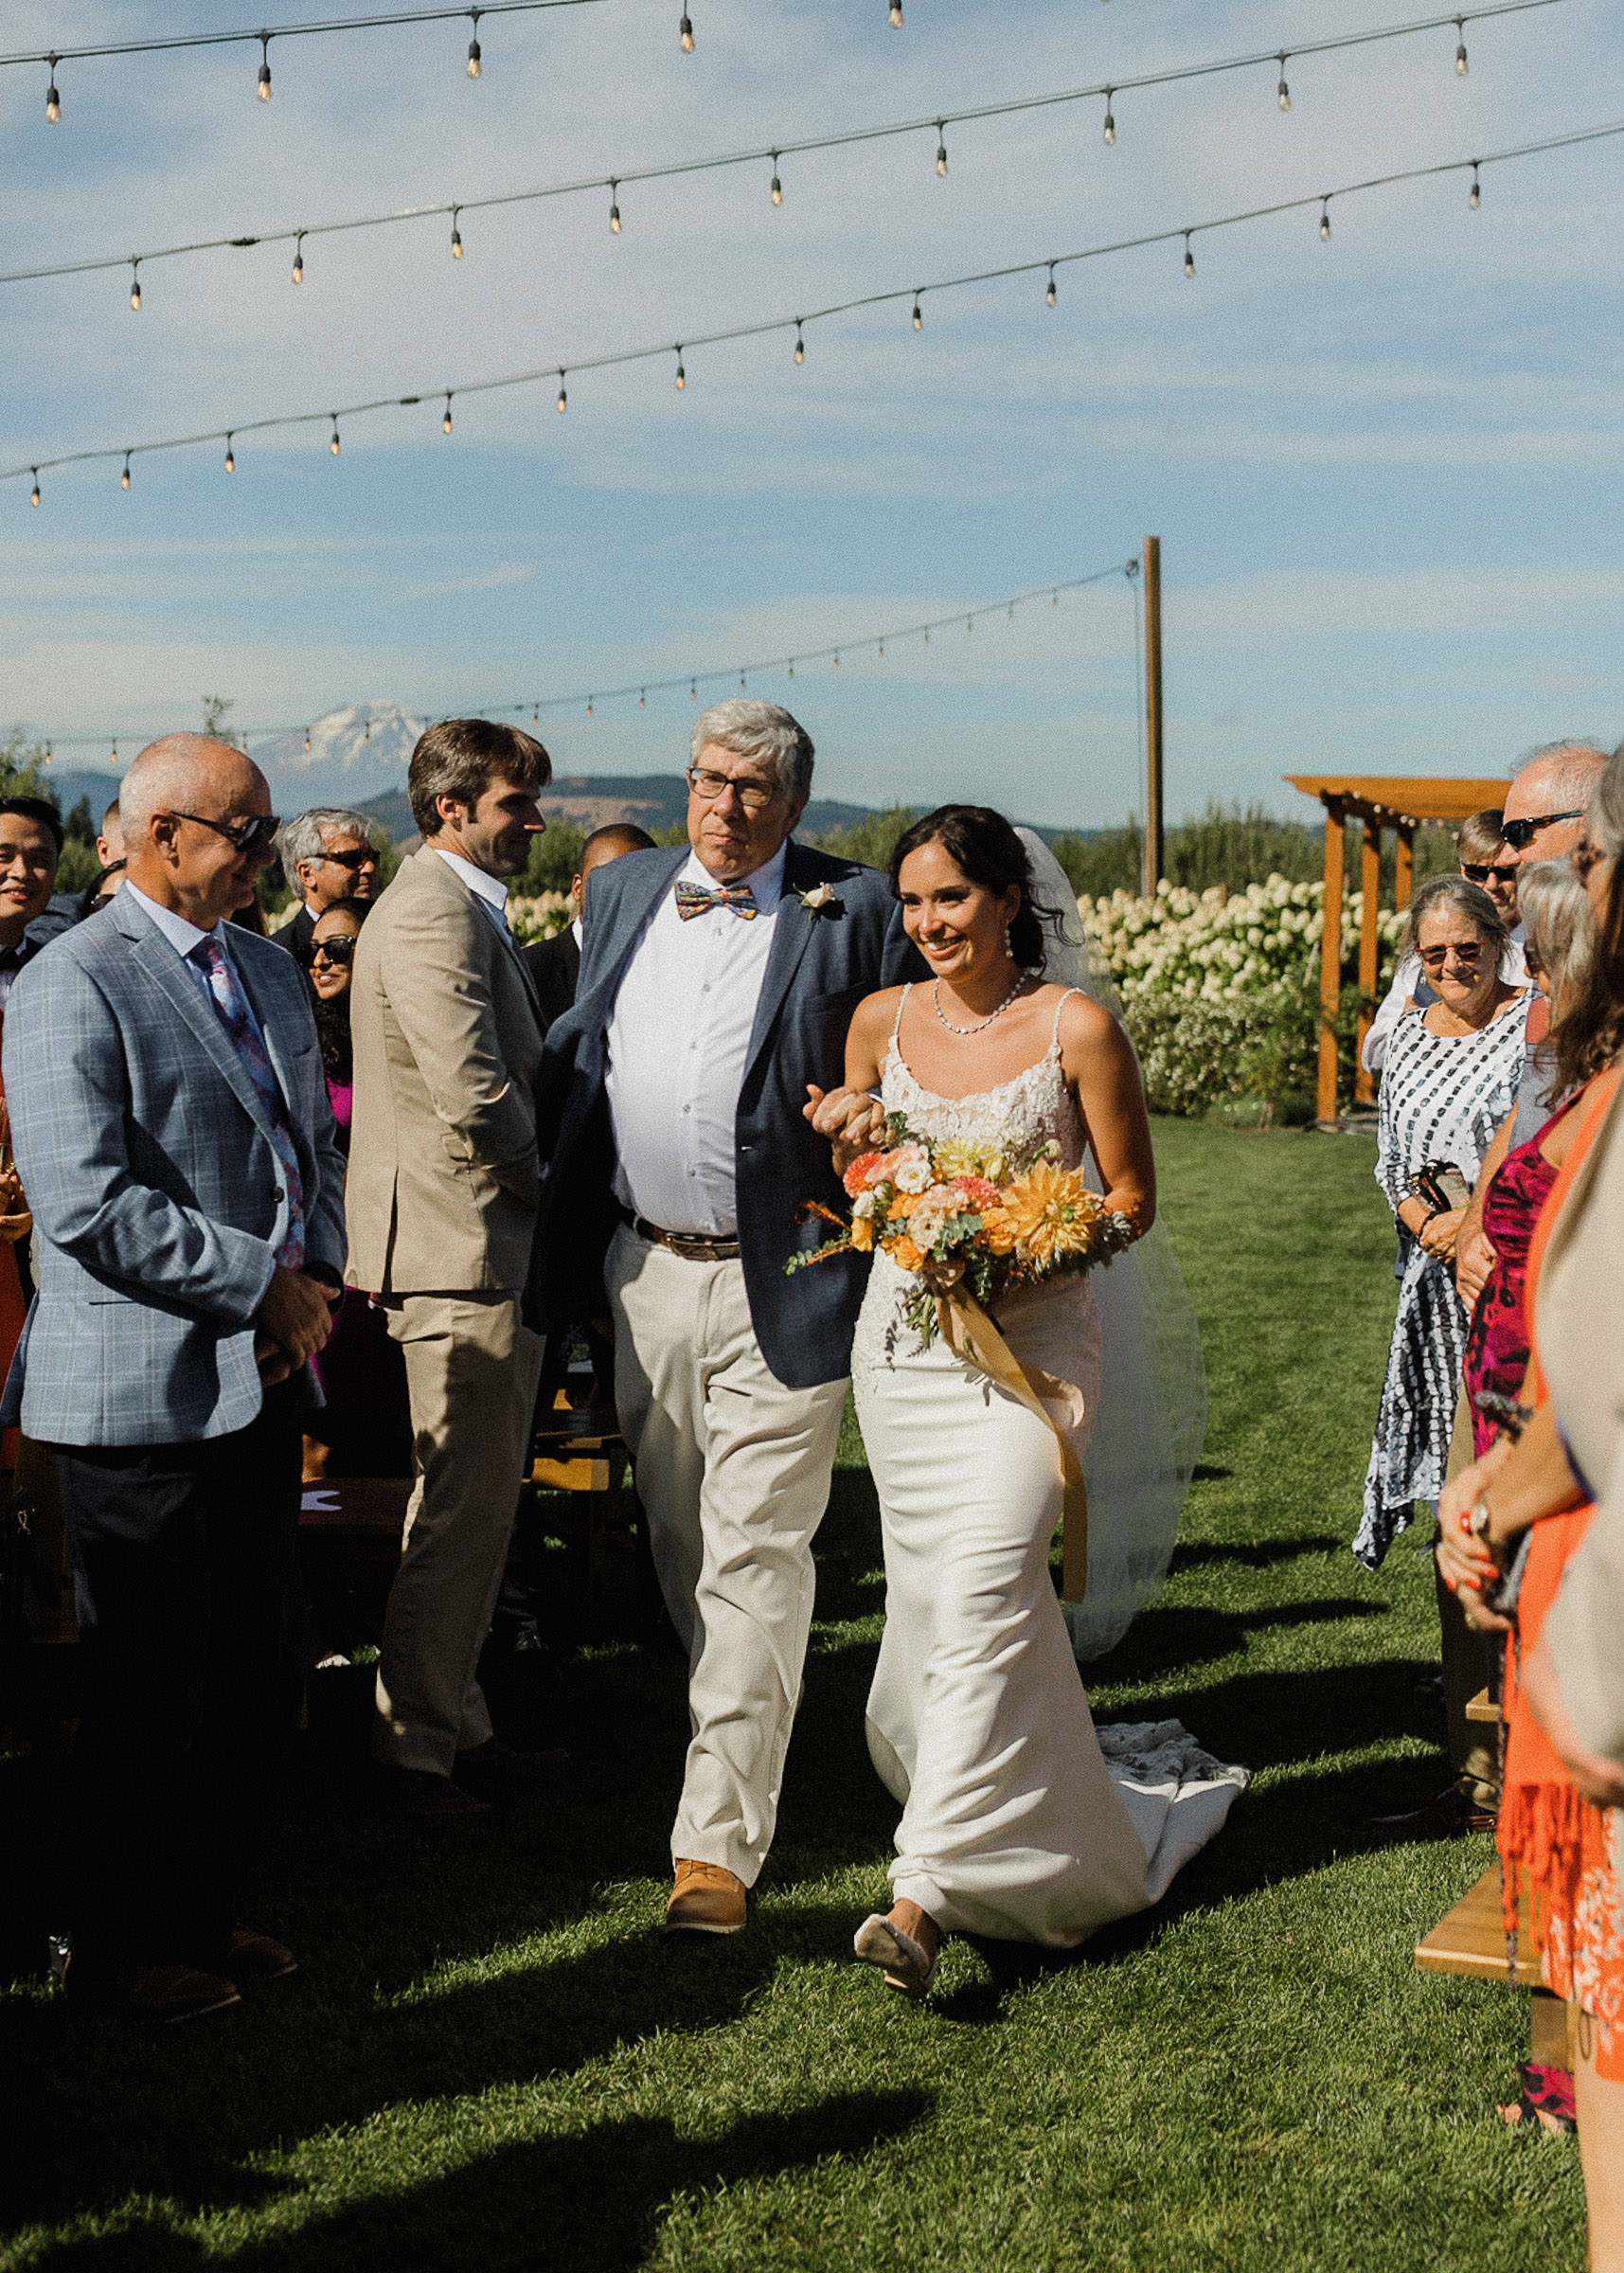 Father walks bride down the aisle during a wedding ceremony at The Orchard in Hood River